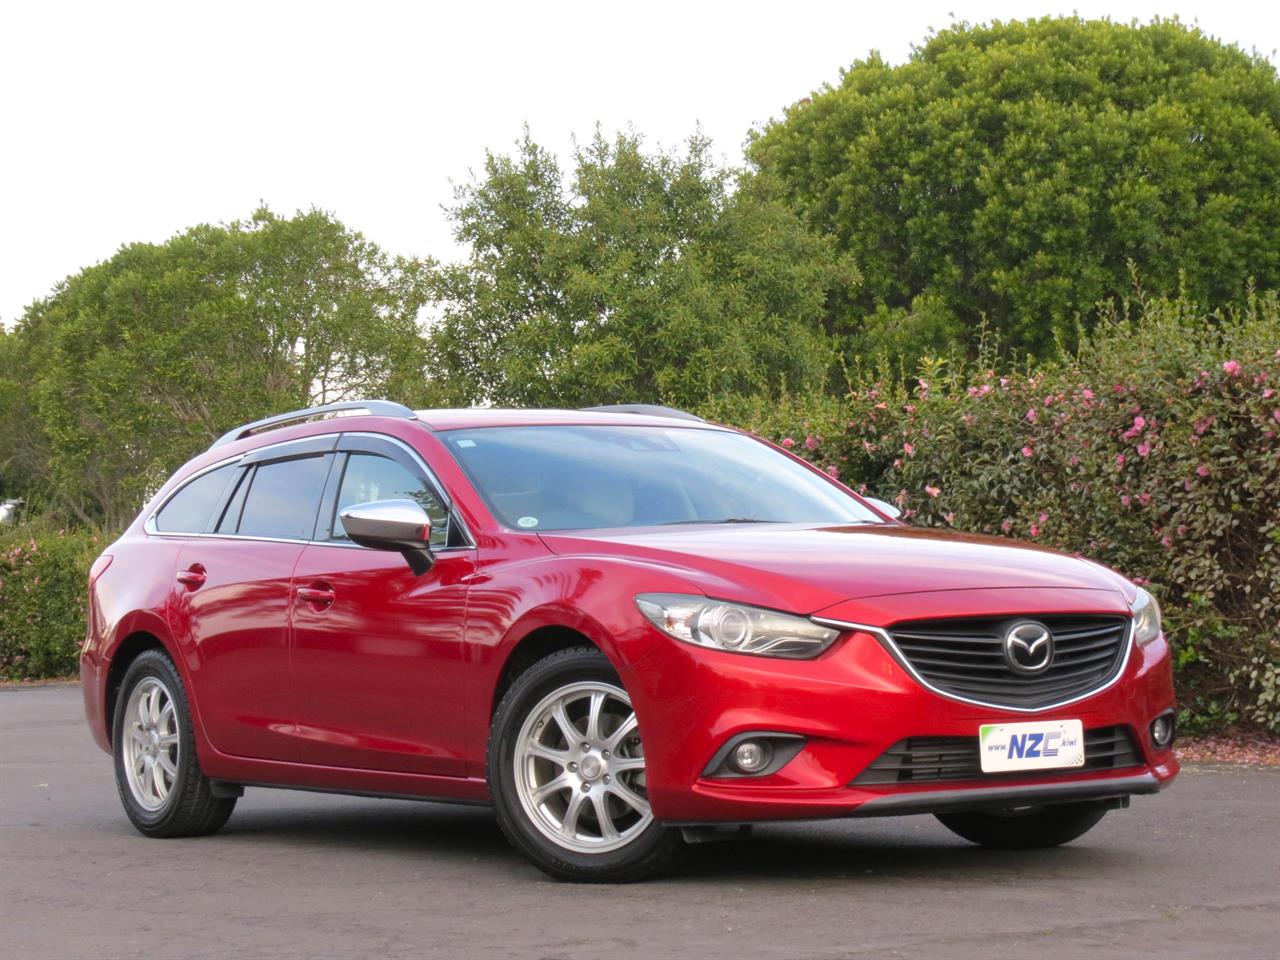 2014 Mazda Atenza only $51 weekly